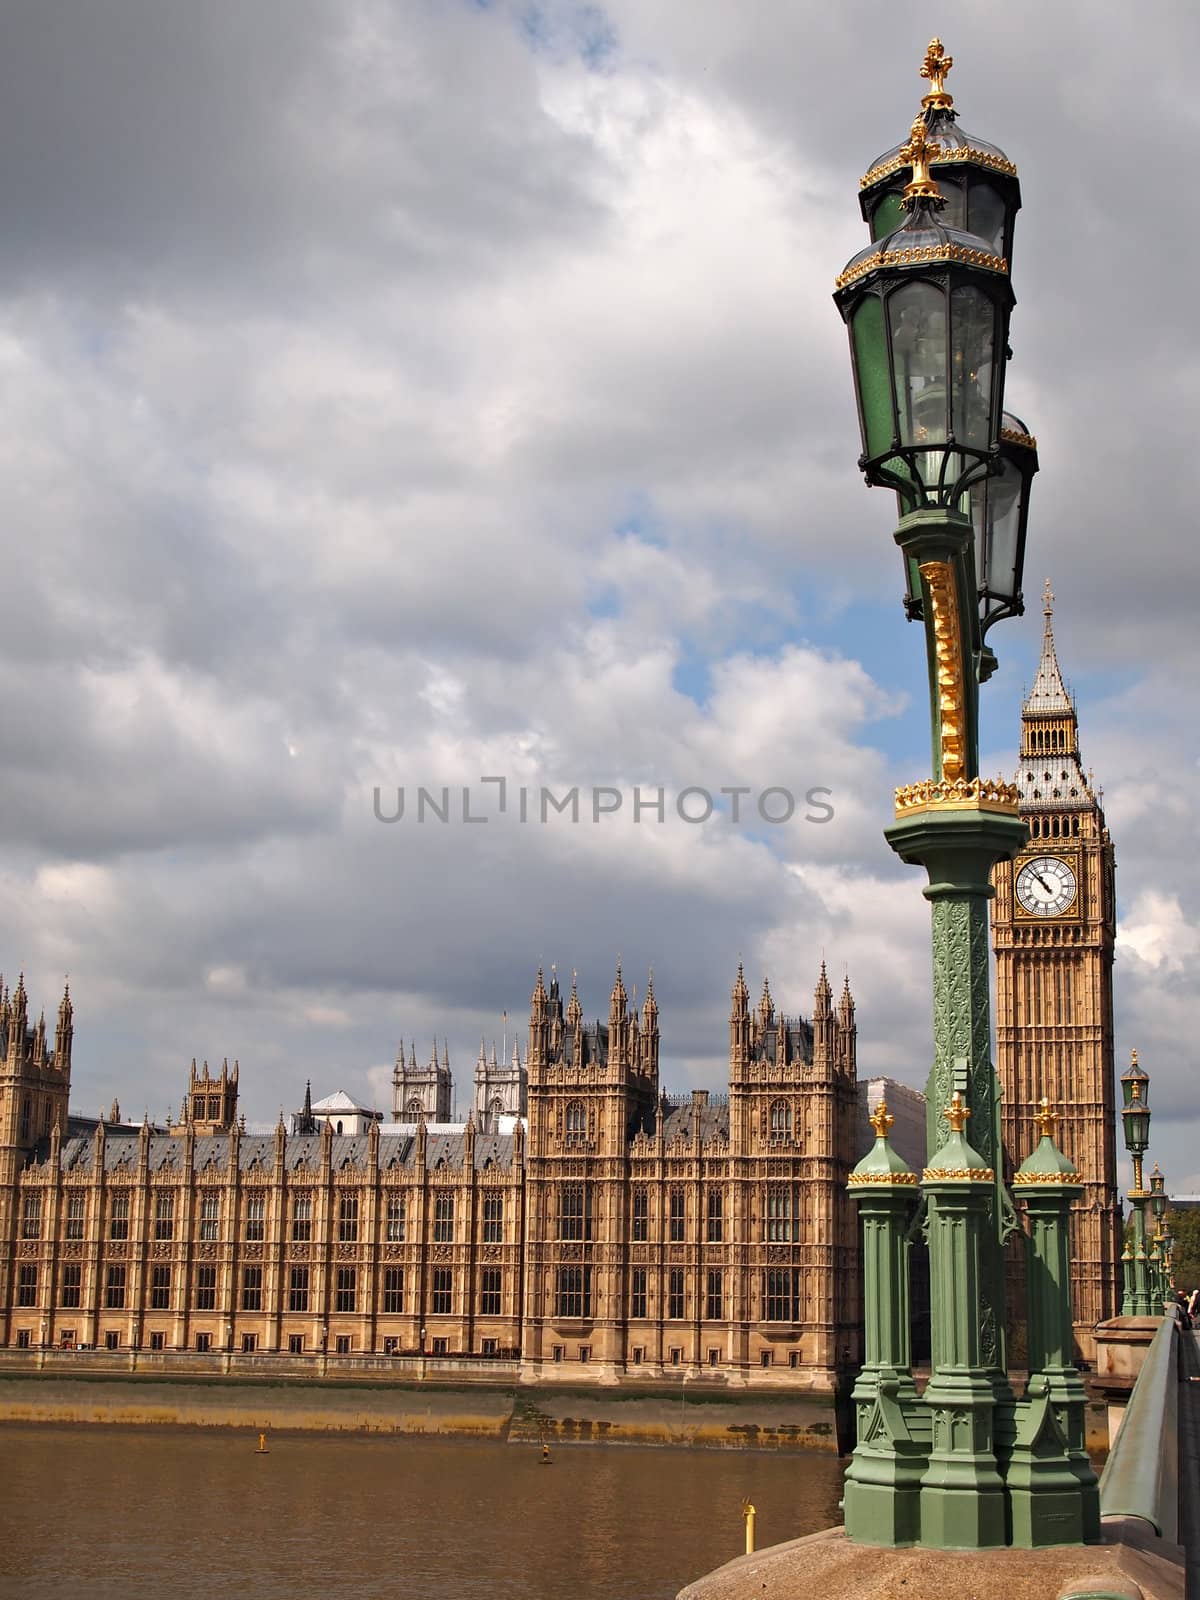 The Big Ben, the Houses of Parliament and a typical streetlight in the city of London, United Kingdom.